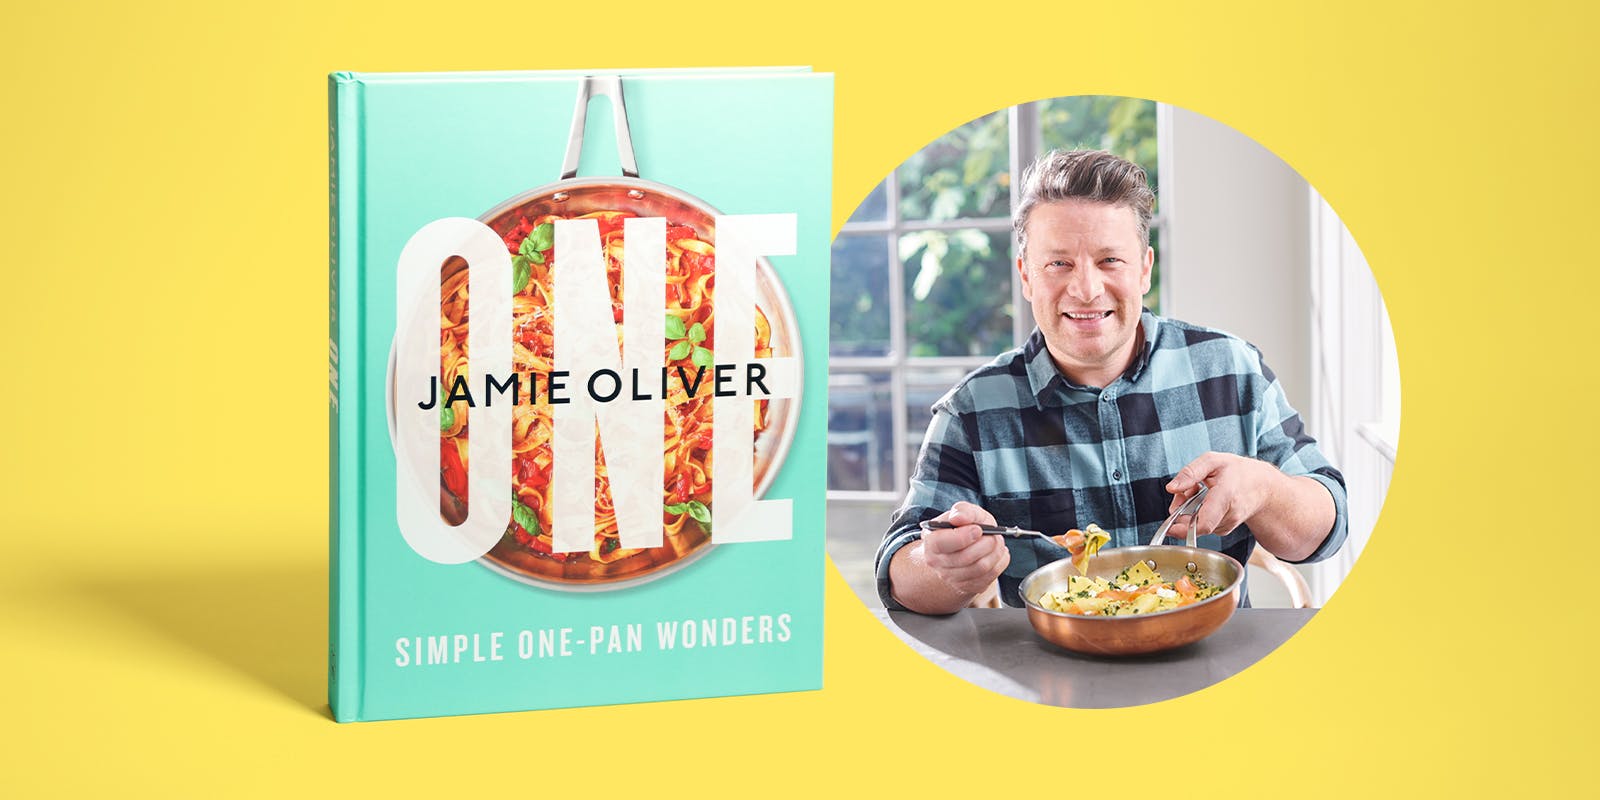 Jamie Oliver explains how his new cookbook will make your life simpler